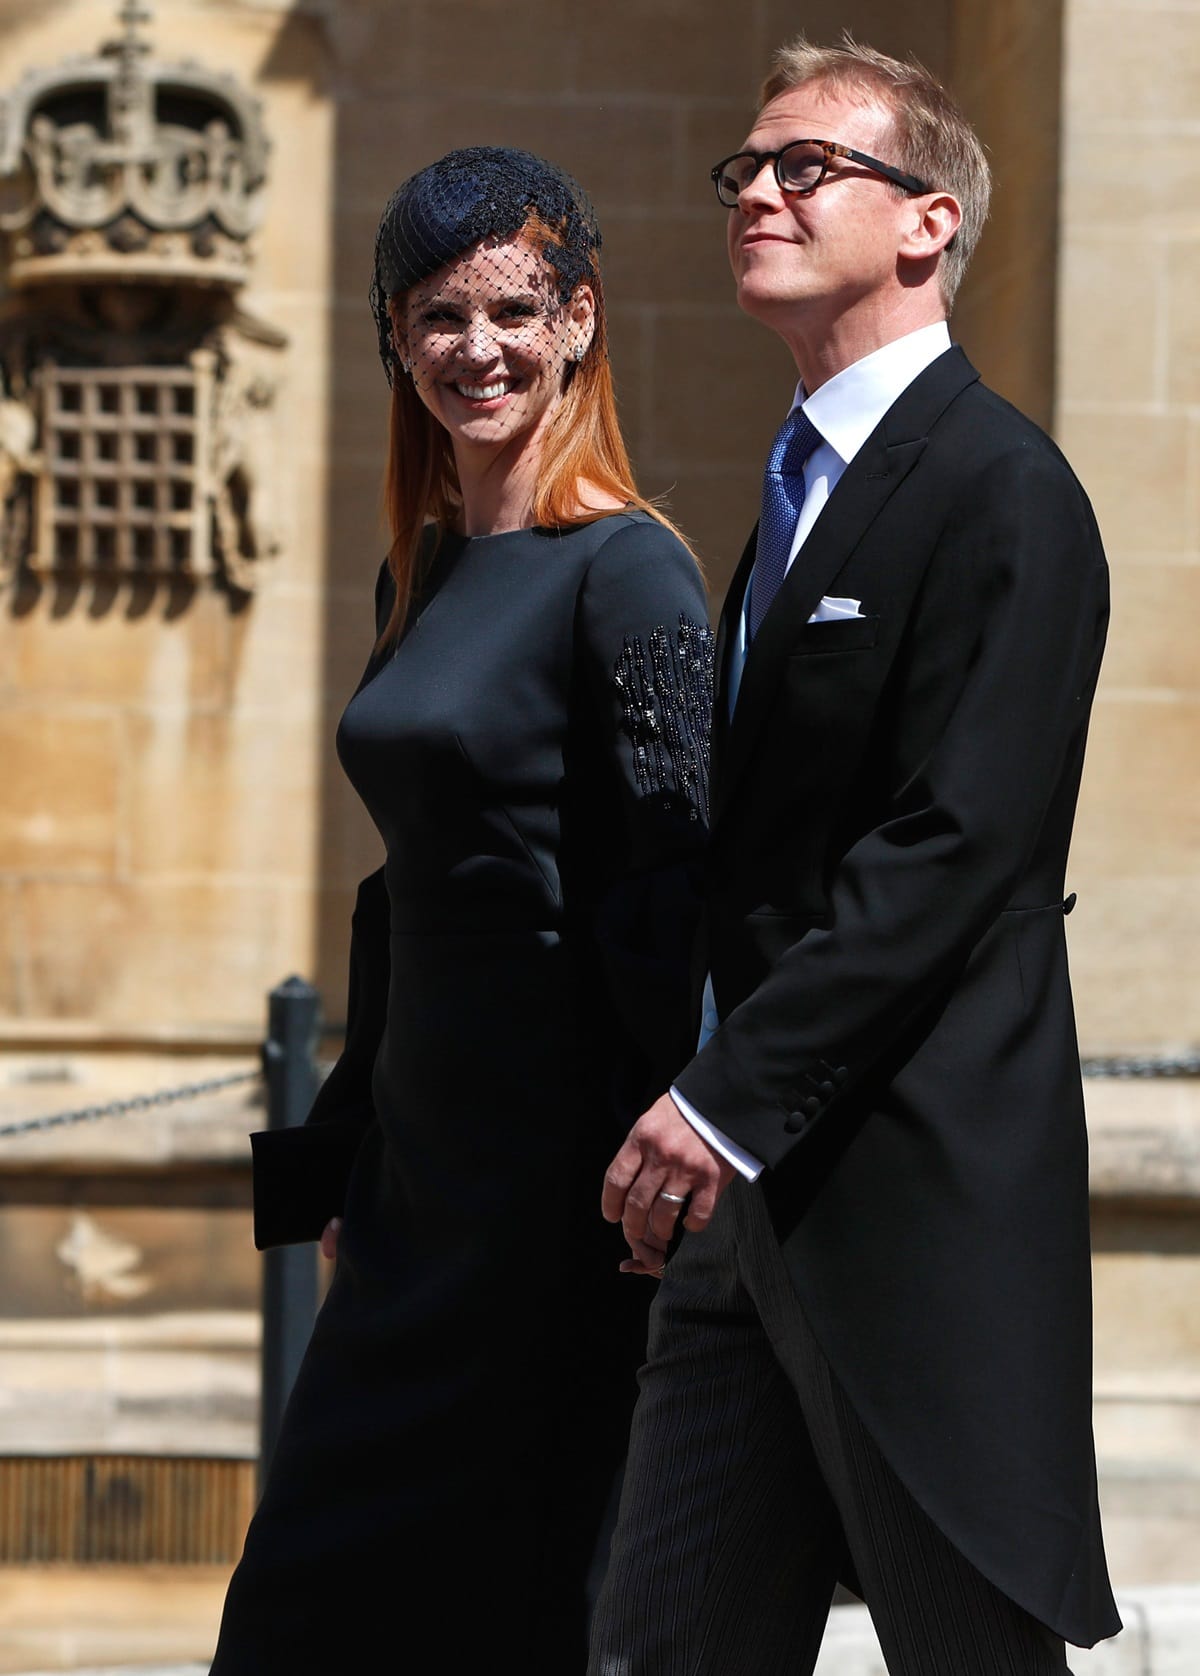 Sarah Rafferty met her husband, Santtu Seppala, at Yale University, where Rafferty was pursuing her MFA in acting, and they married on June 23, 2001, at the Roman Catholic Church of St. Mary in Greenwich, Connecticut